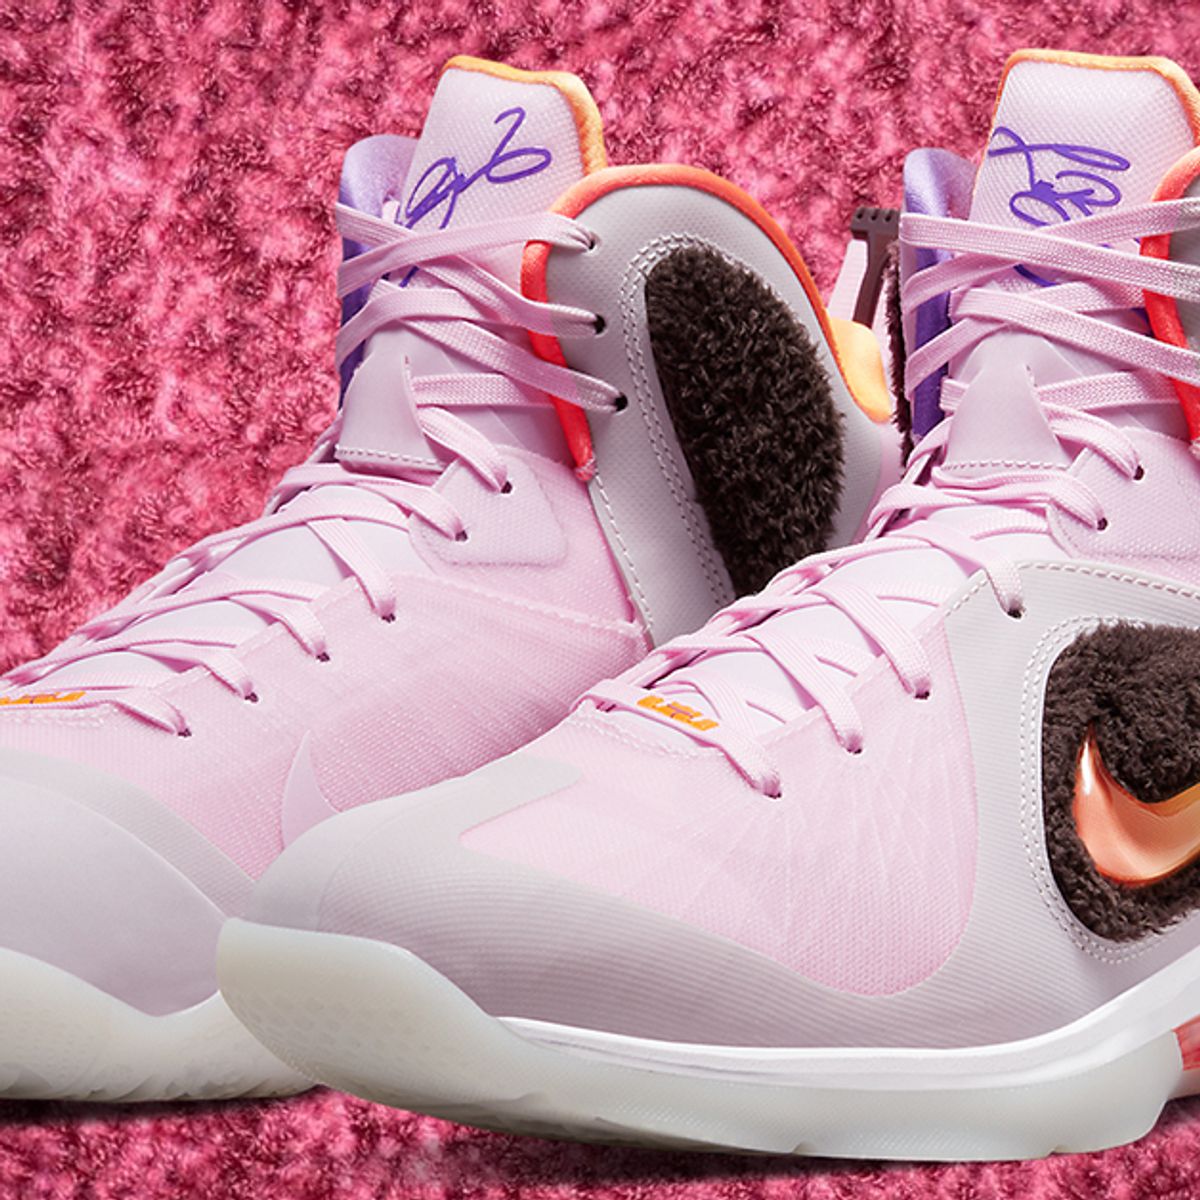 The Nike LeBron 20 Appears With An All-Pink Upper - Sneaker News